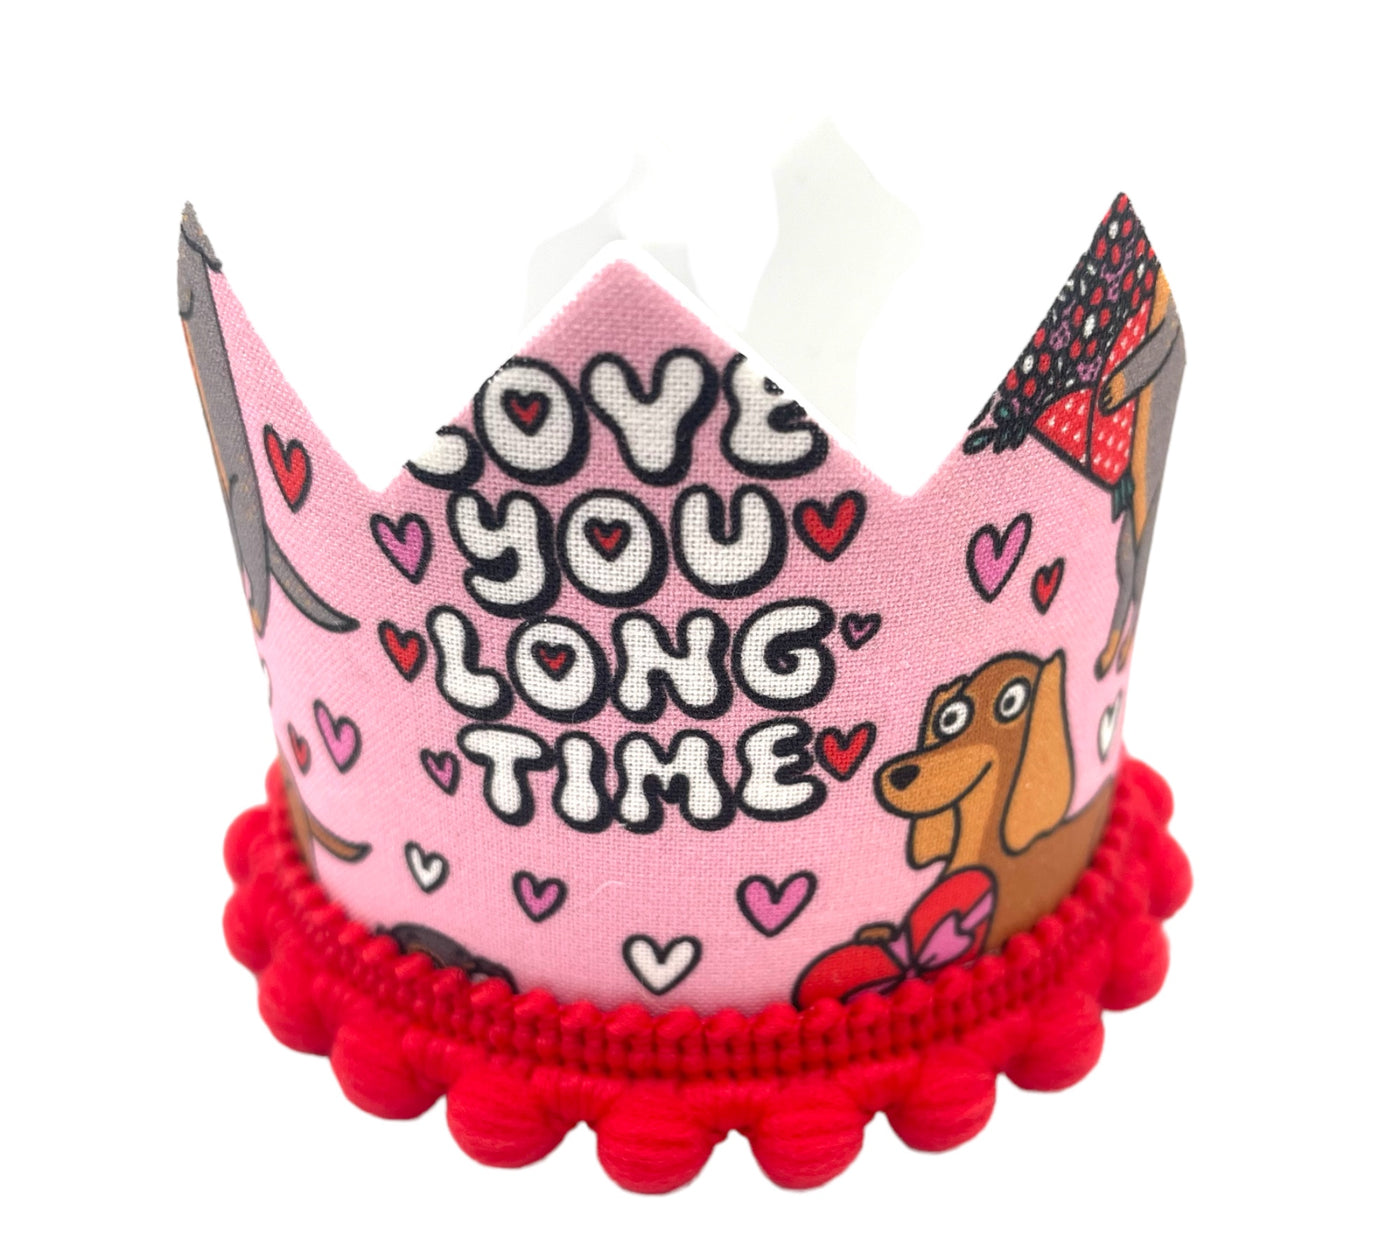 Love you Long Time party crown and Badge Bow® Set